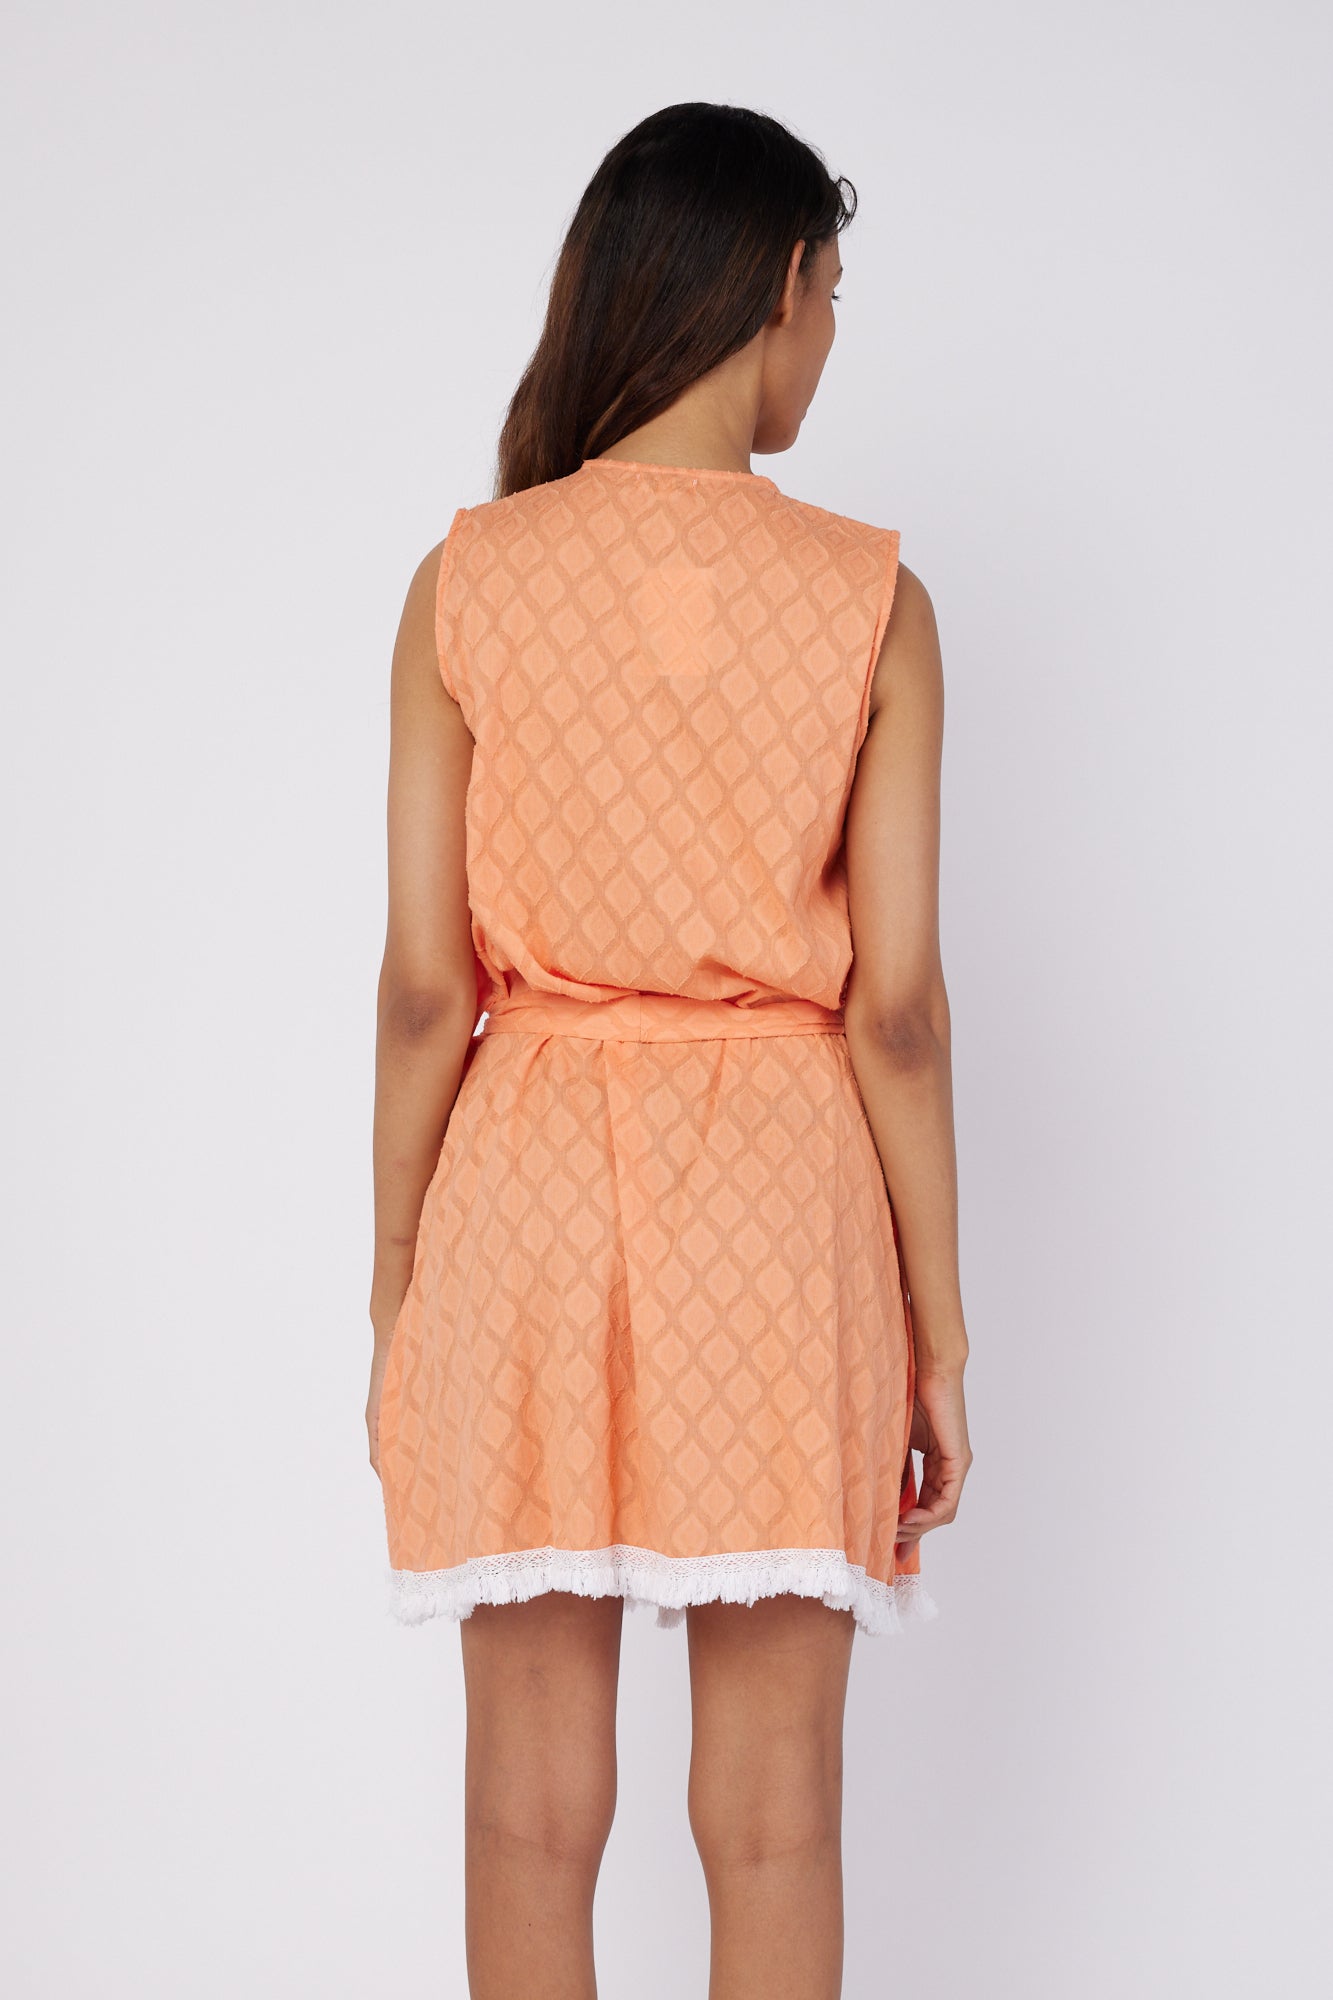 ModaPosa Felice Sleeveless V-Neck Puntuck Knee Length Dress with Detachable Belt in Paradise Orange . Discover women's resort dresses and lifestyle clothing inspired by the Mediterranean. Free worldwide shipping available!